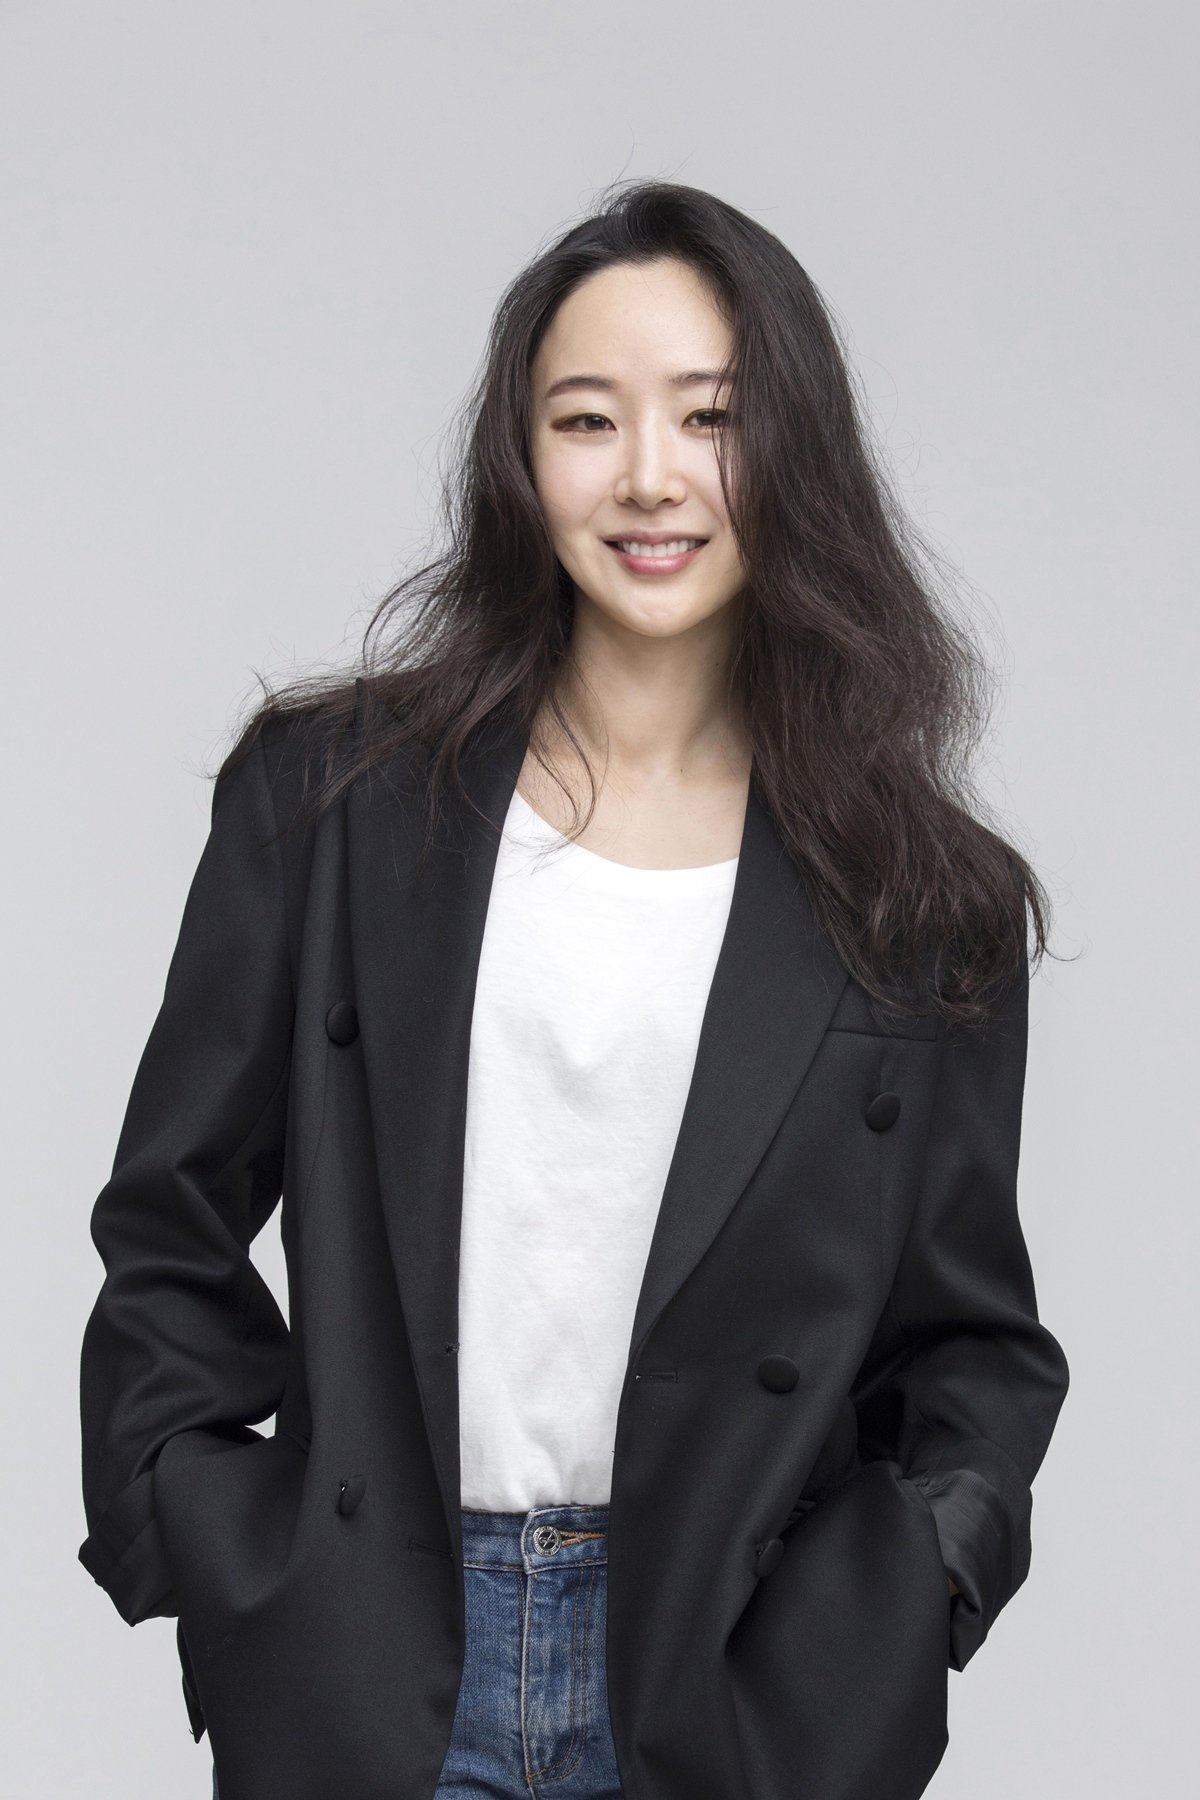 Min Hee-jin is the new CEO of Hybe’s sub label Ador – but is her creativity suddenly getting her in trouble? Photo: Hybe